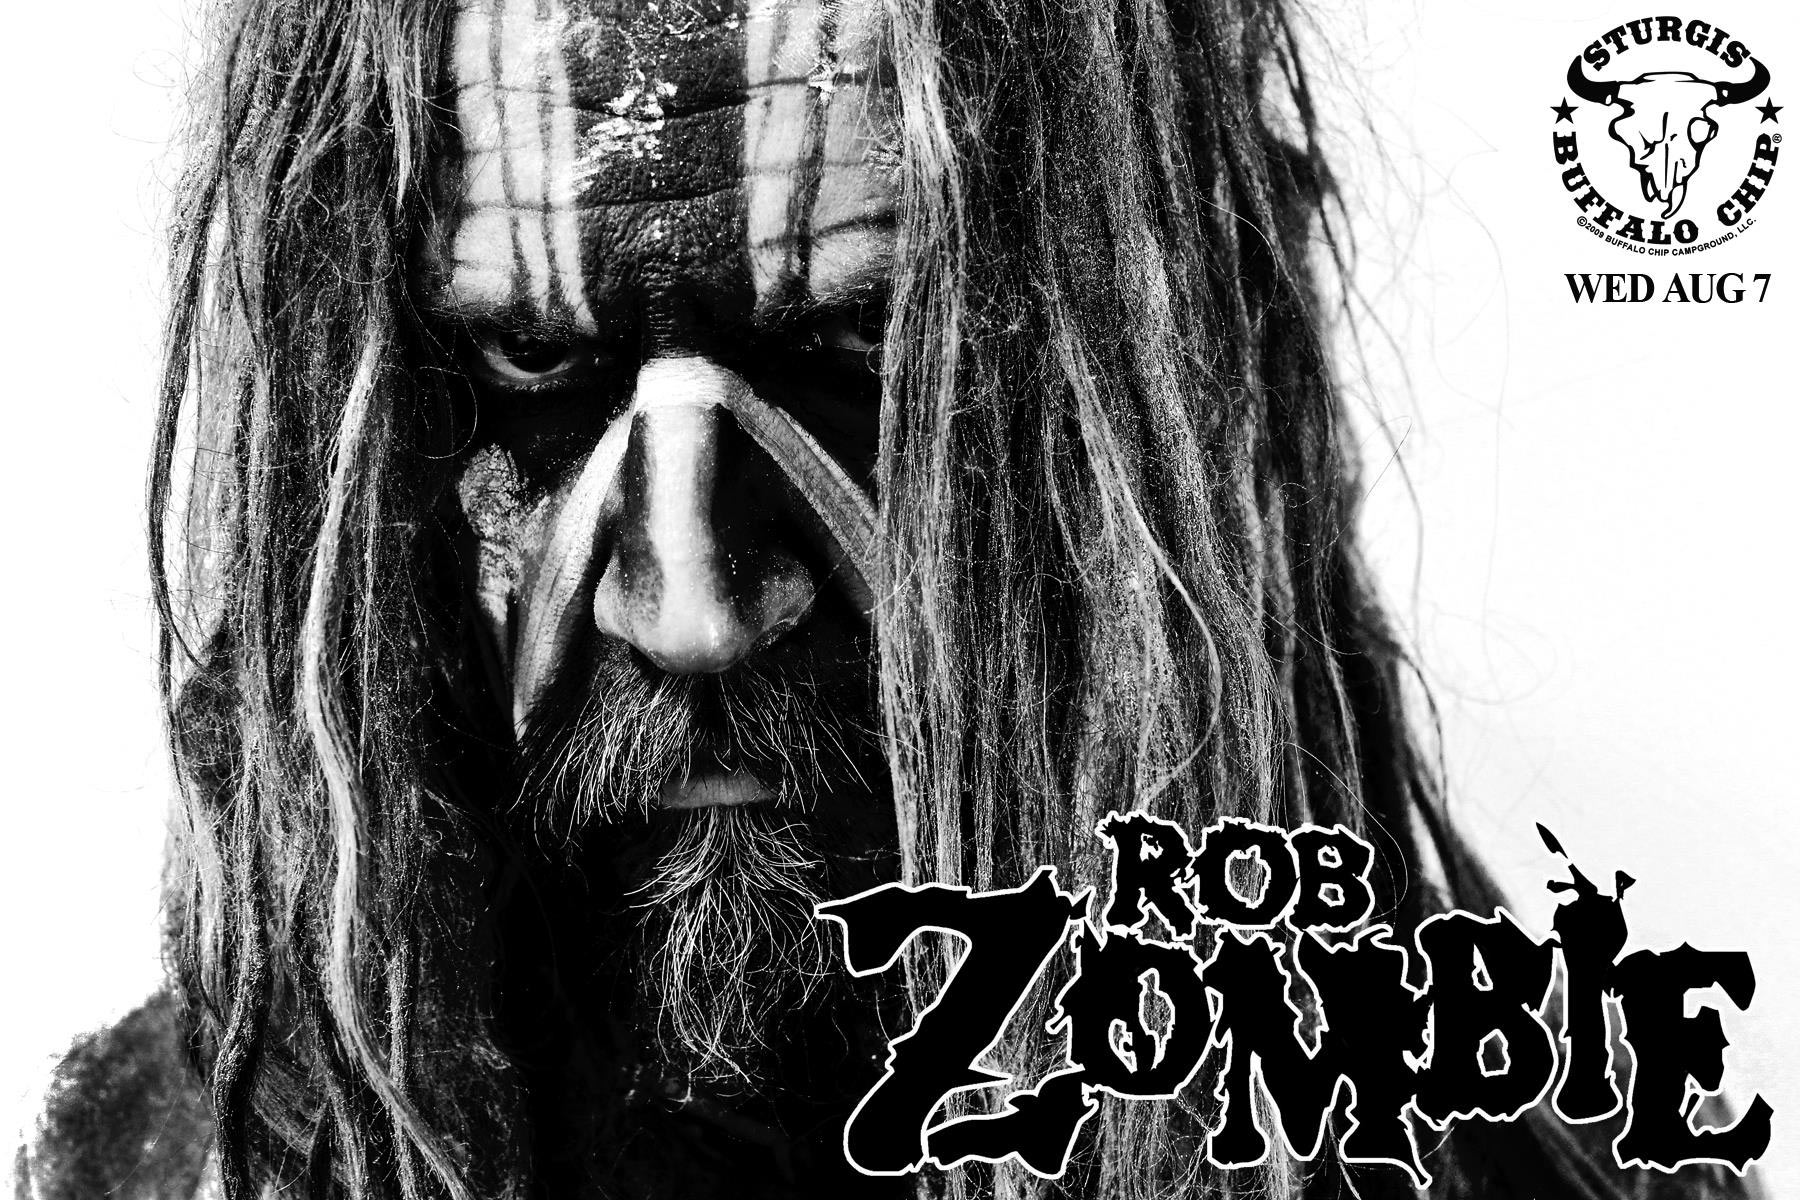 Rob Zombie Art Wallpapers